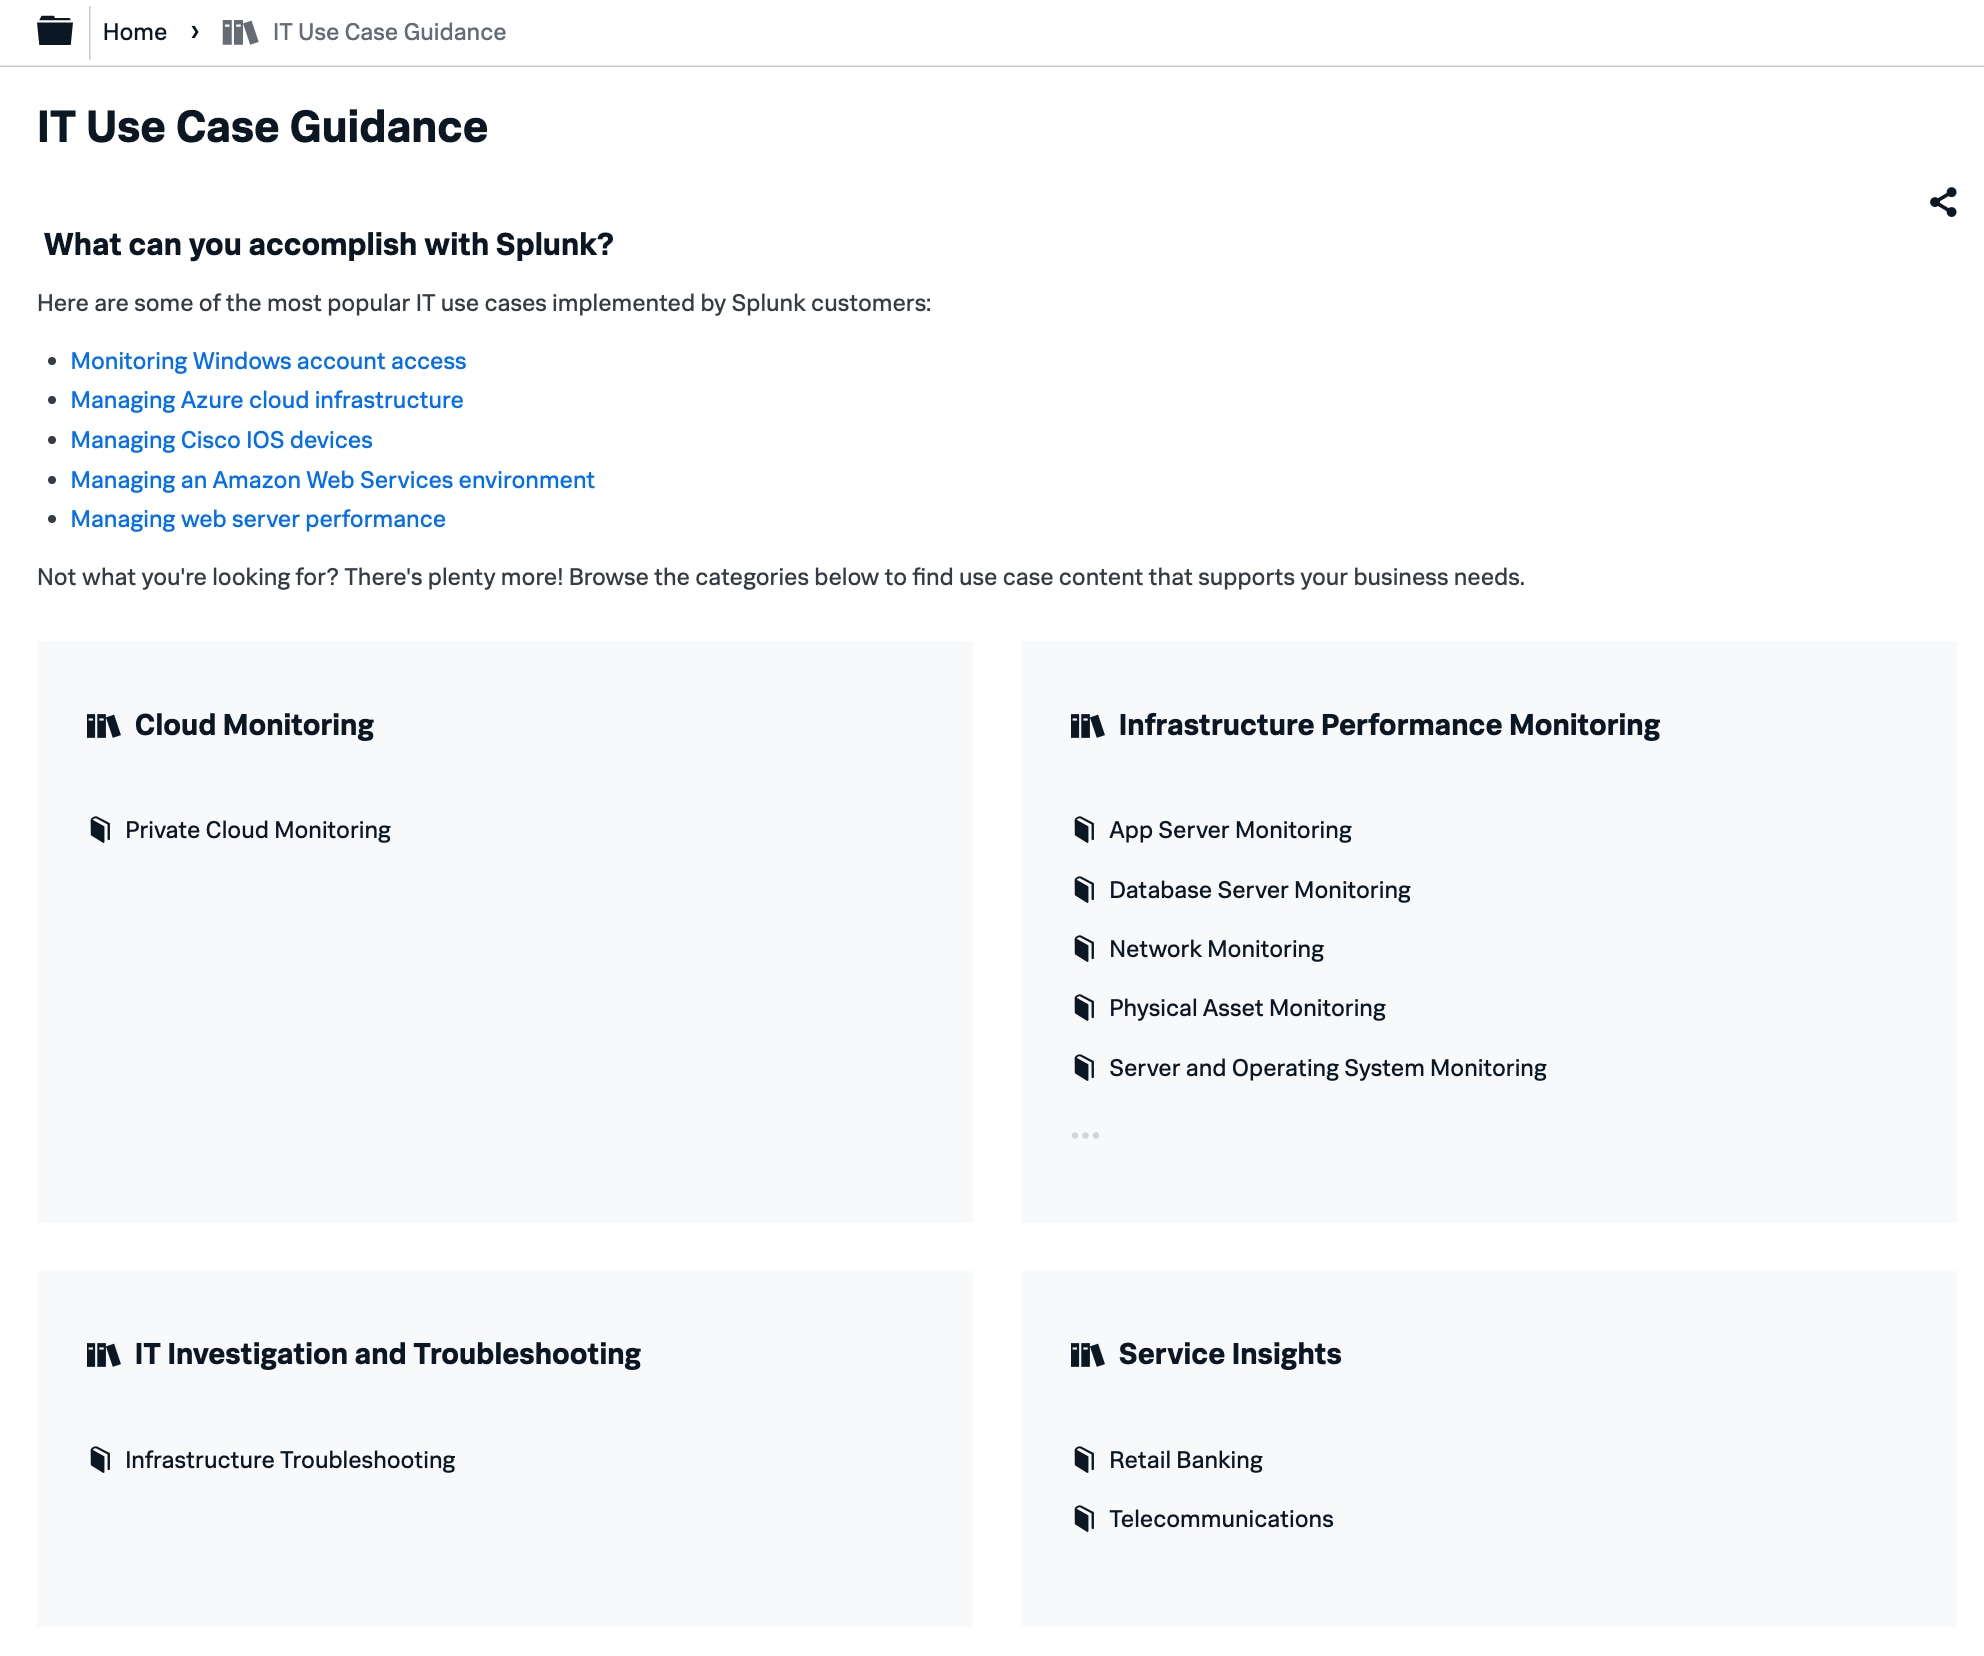 IT Use Case Guidance”